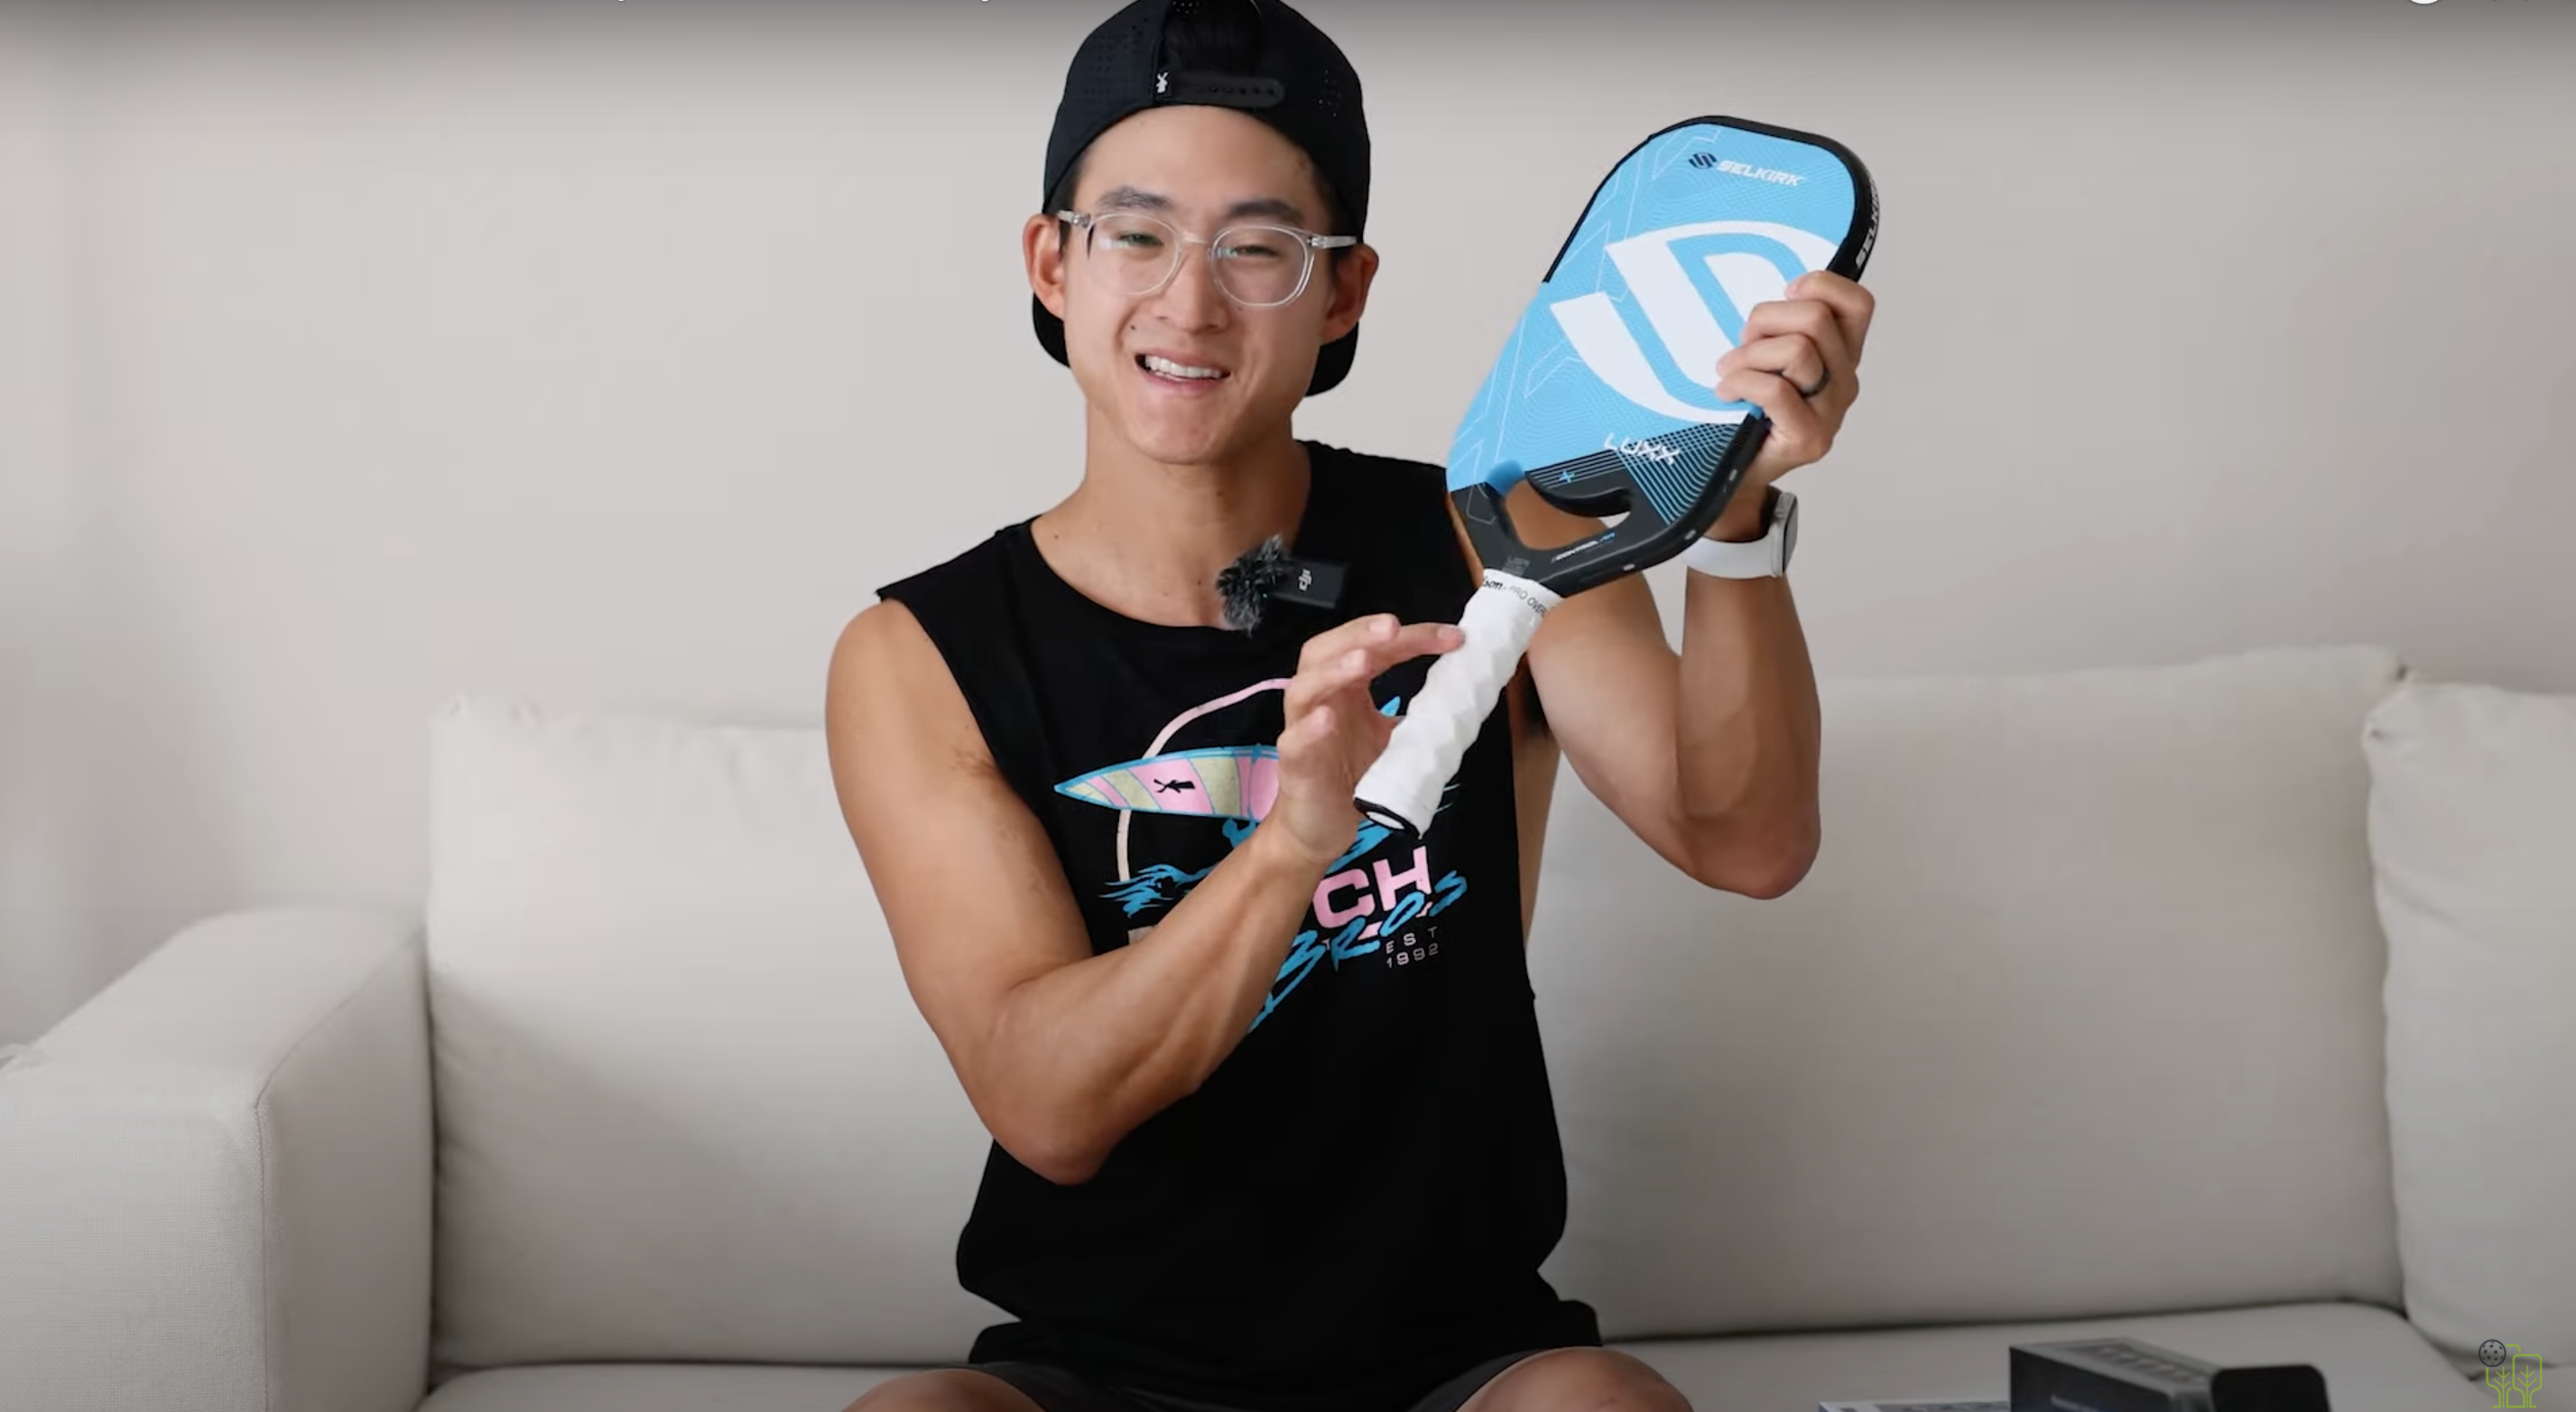 Load video: Upgrade your paddle with Hesacore Grip